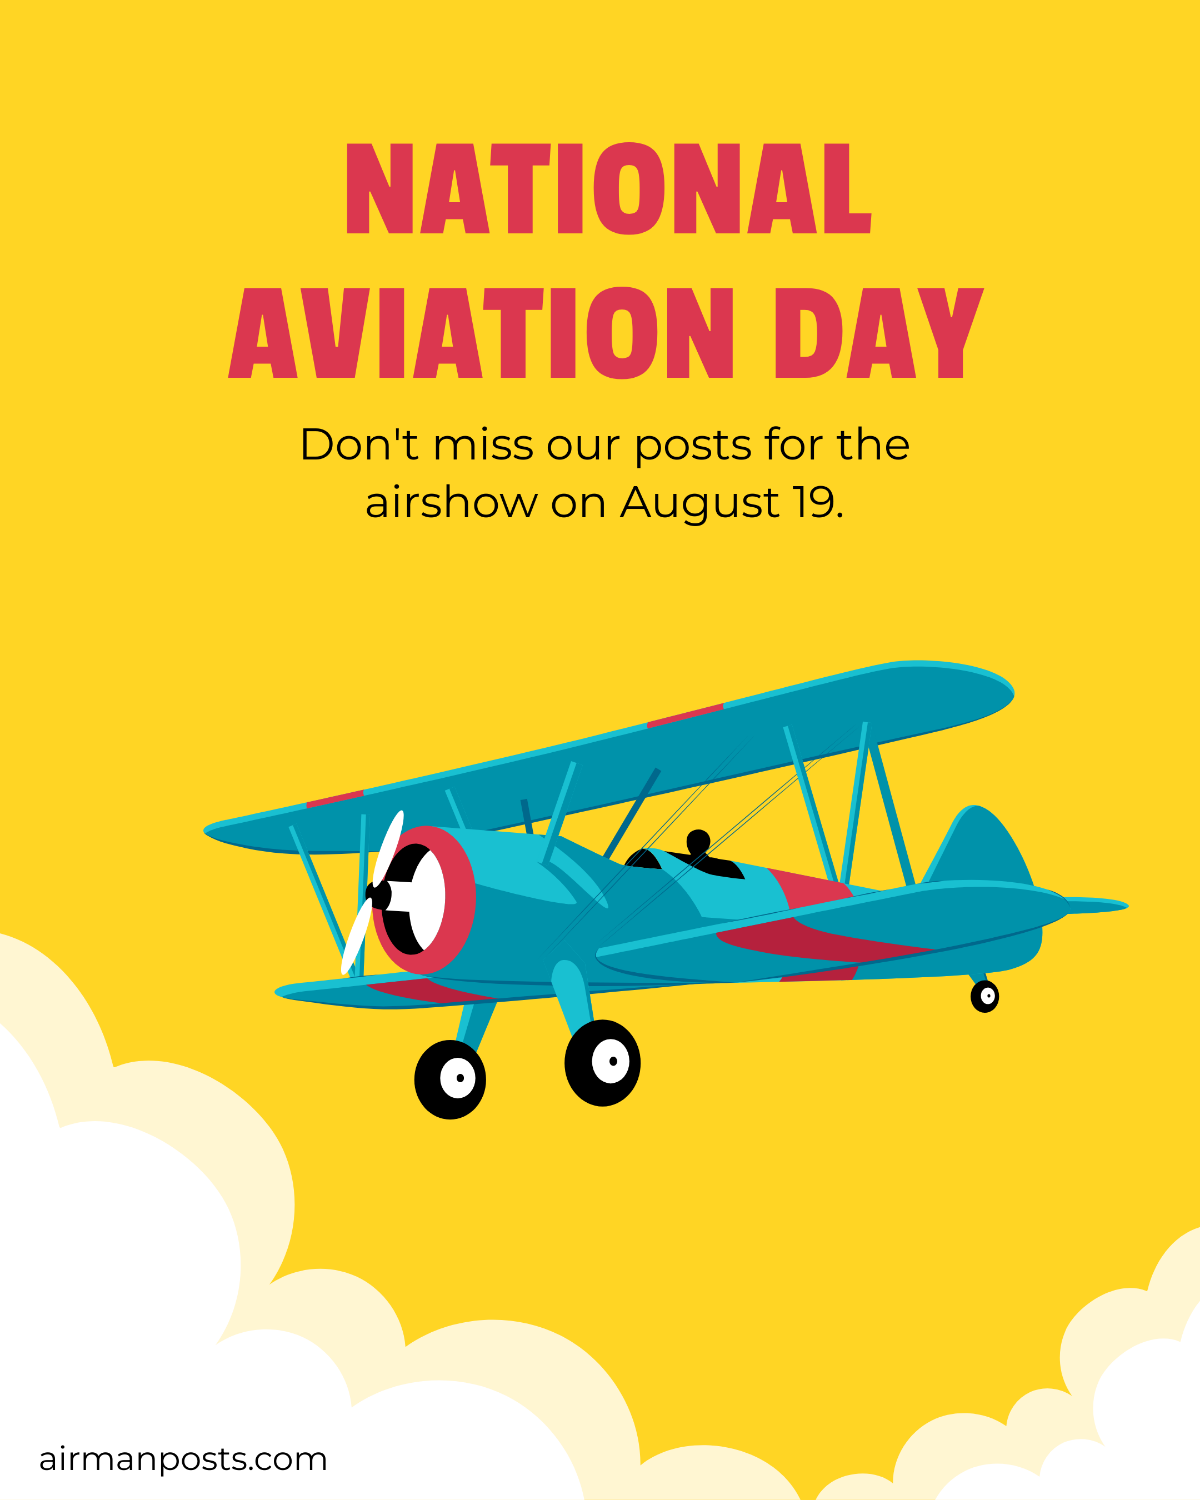 National Aviation Day Instagram Post Template